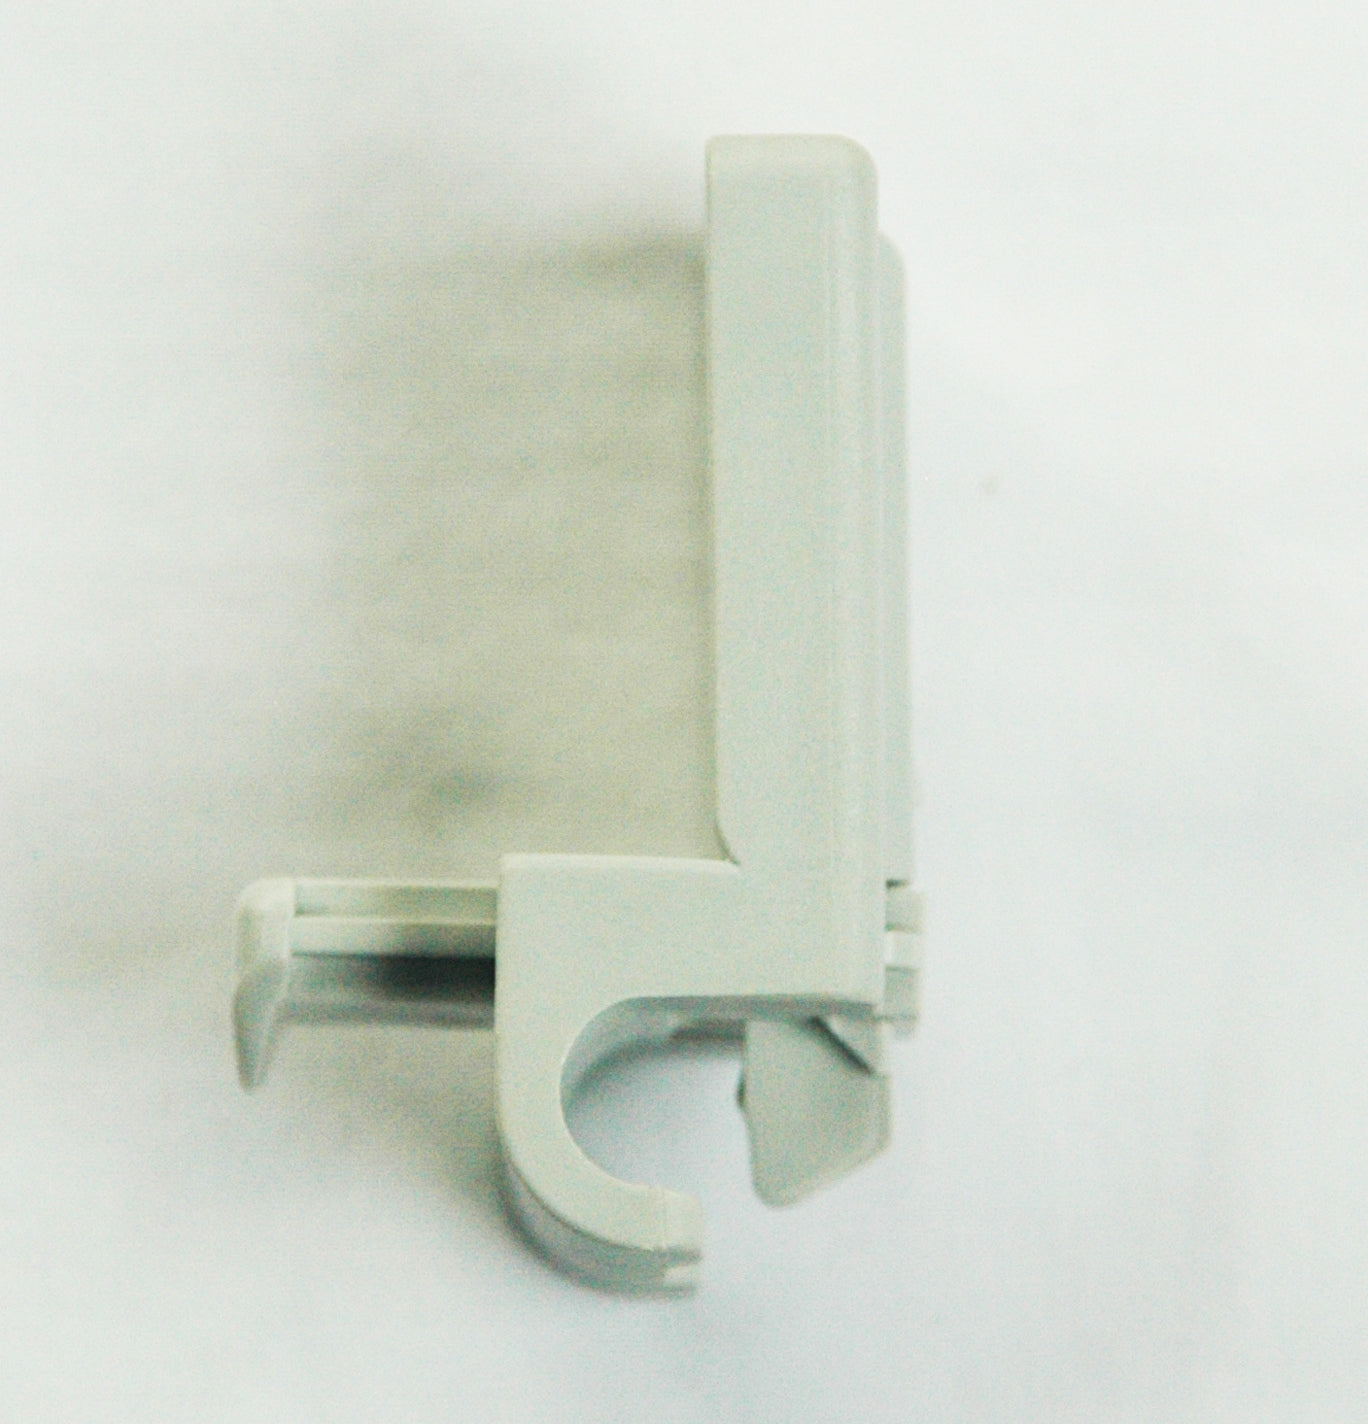 Table Support Catch Retainer Plastic Bracket Image